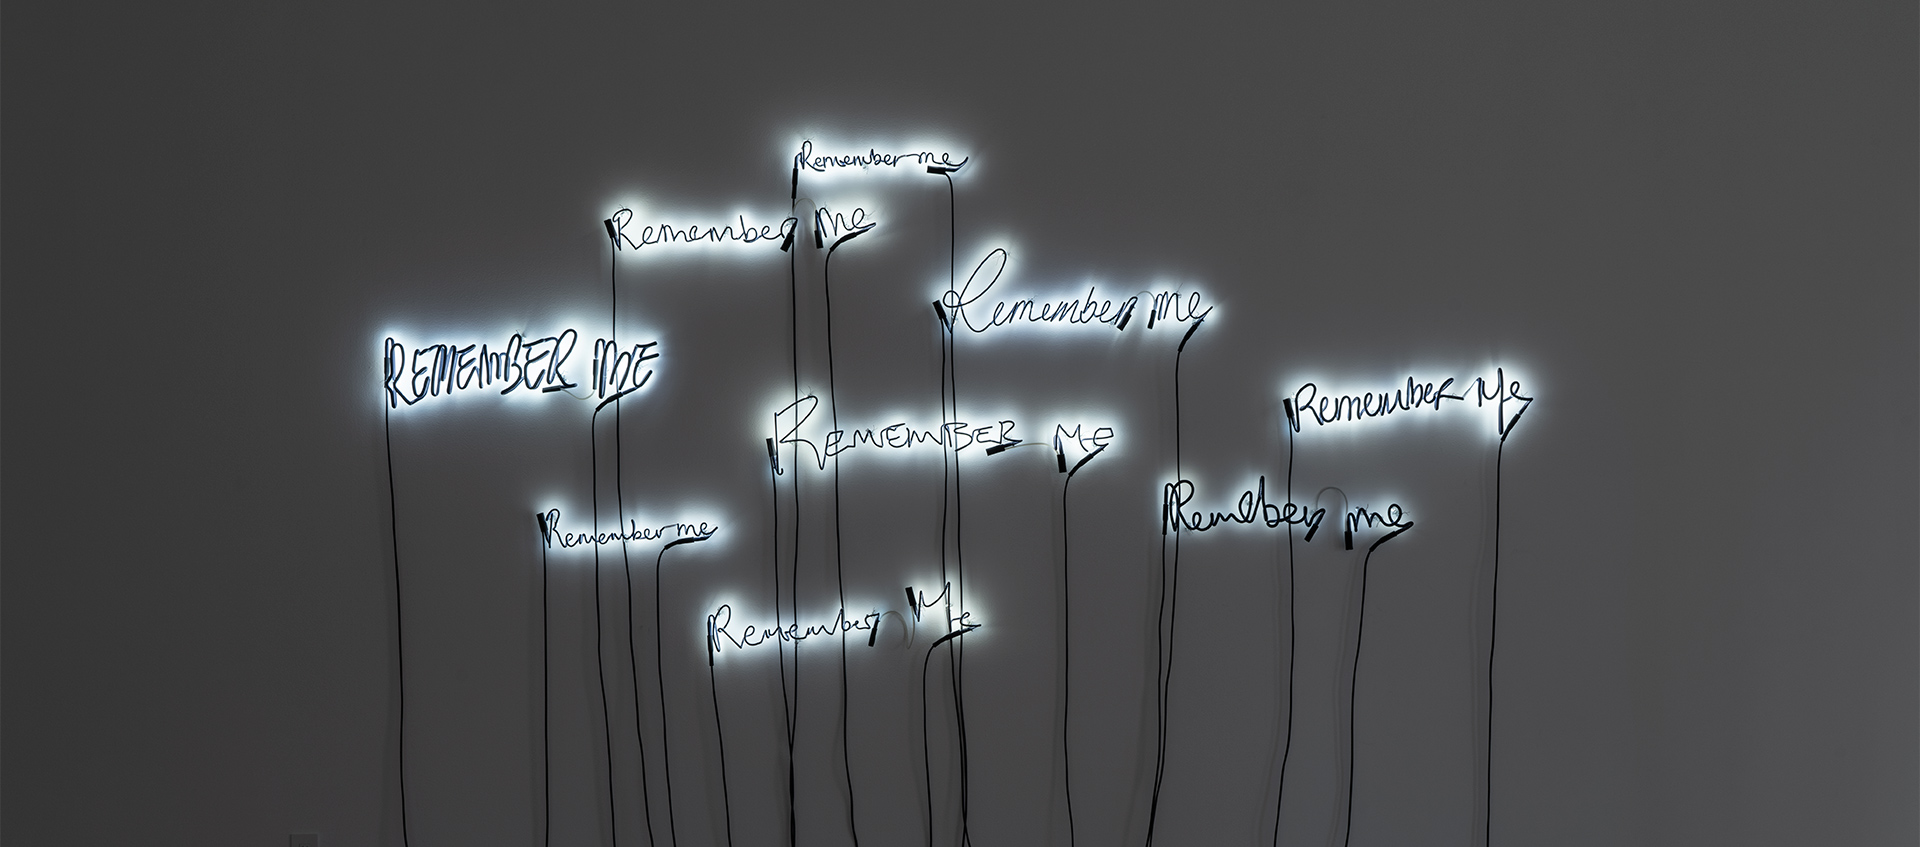 The words "Remember Me" are sculpted in neon and lit against a white wall.